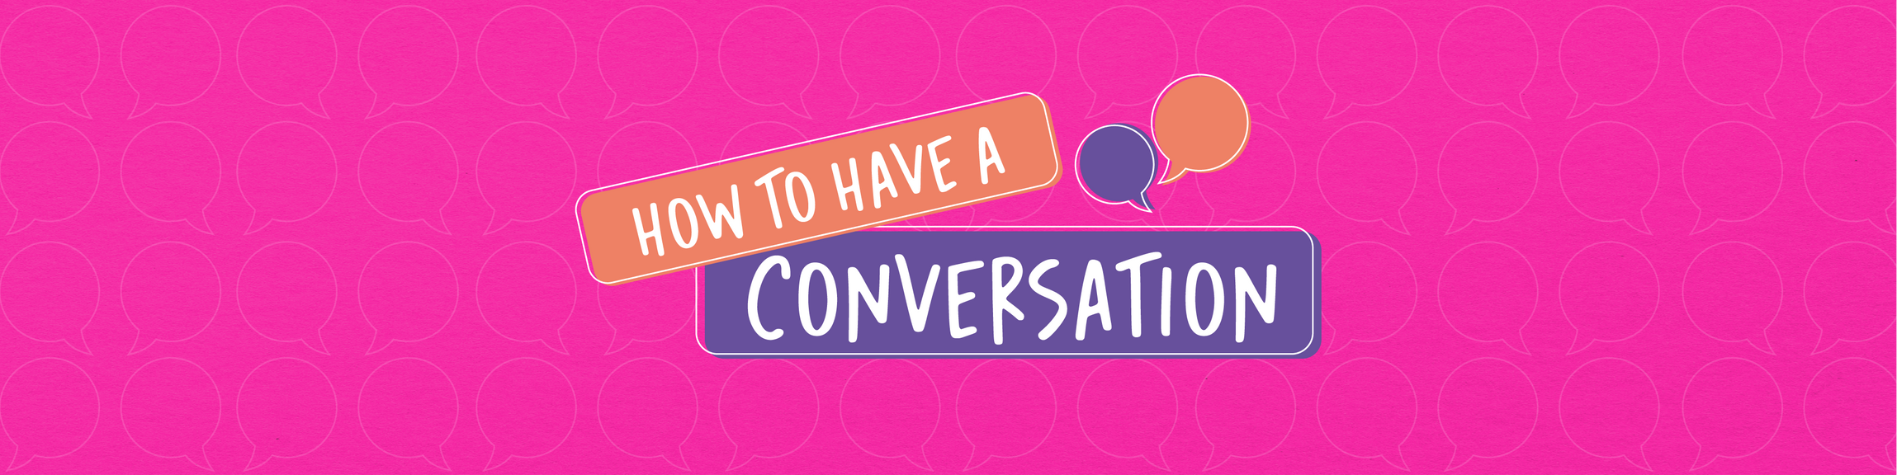 How to Have a Conversation banner